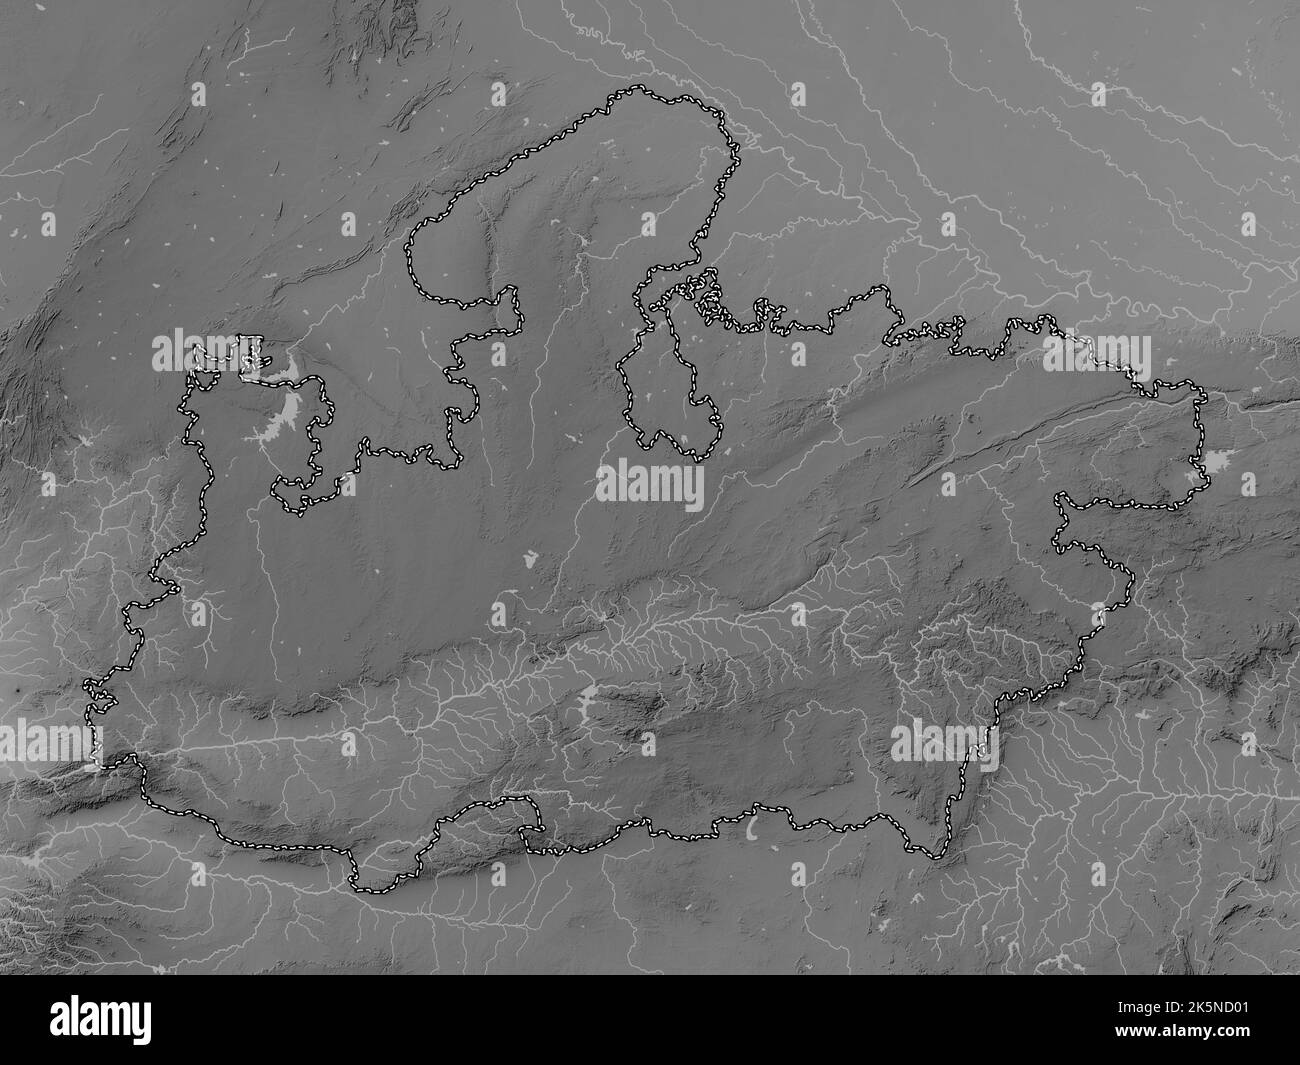 Madhya Pradesh, state of India. Grayscale elevation map with lakes and rivers Stock Photo